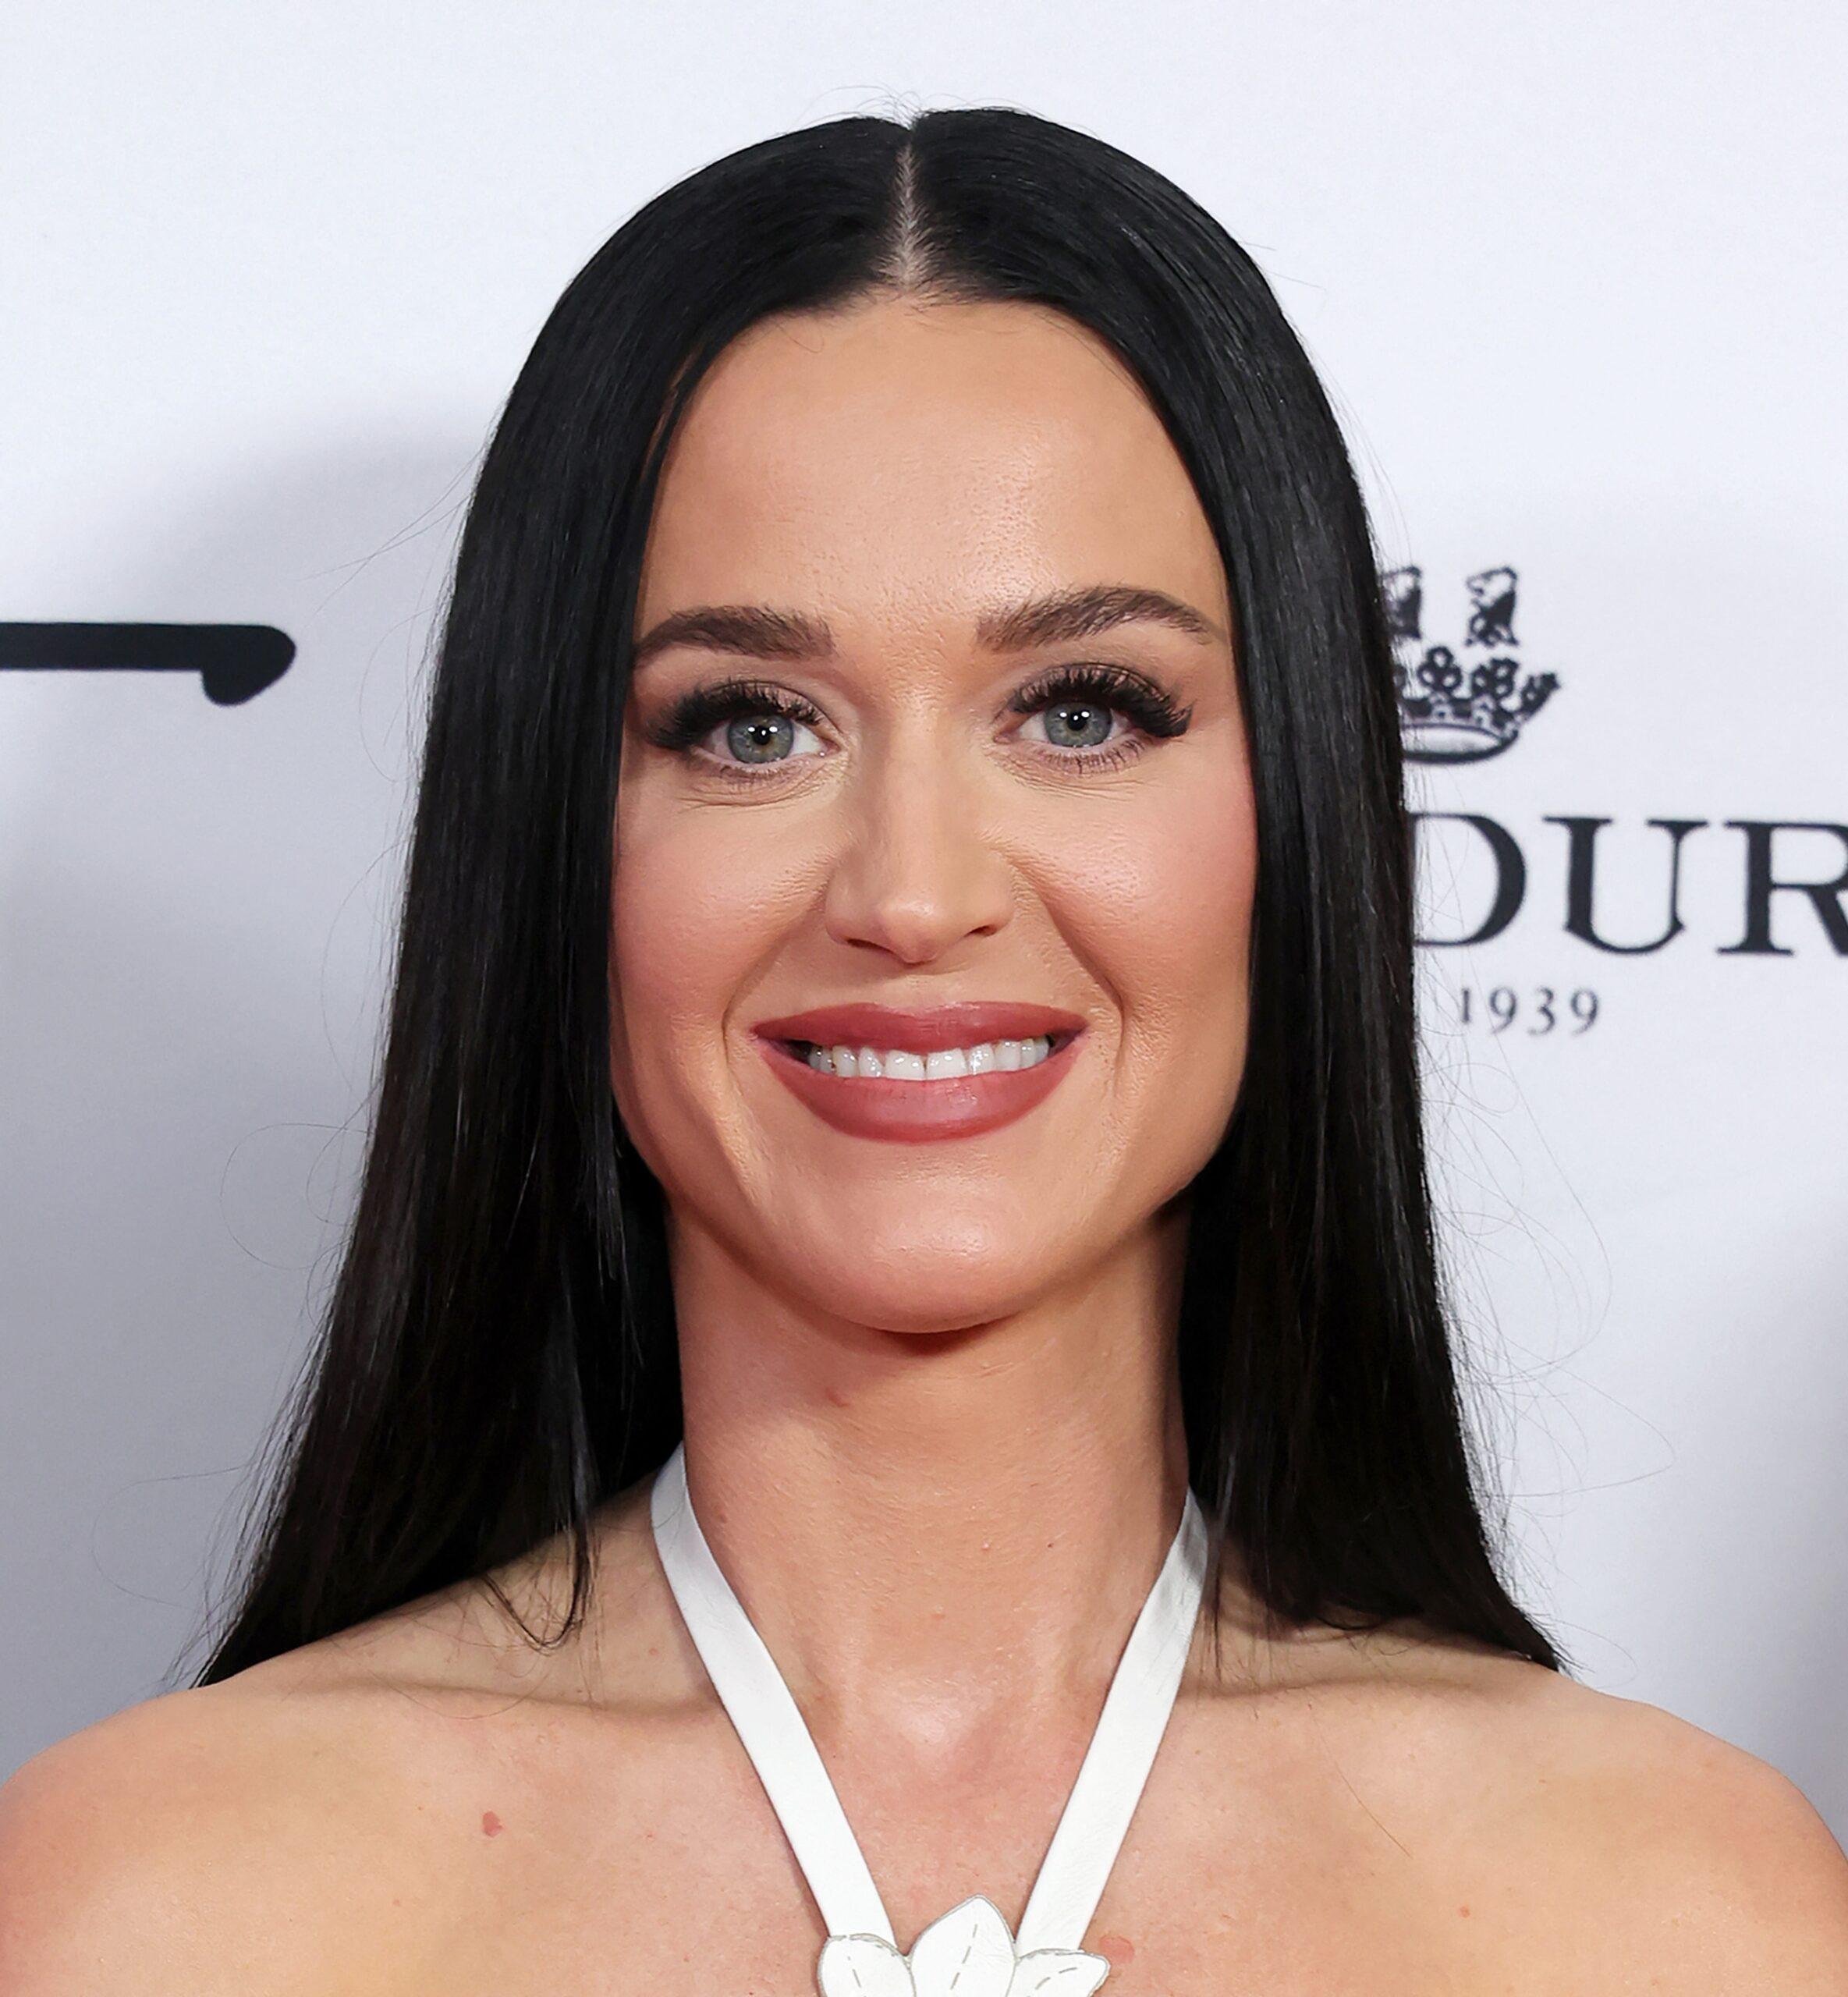 Katy Perry is all smiles at the 35th Annual Colleagues Spring Luncheon.